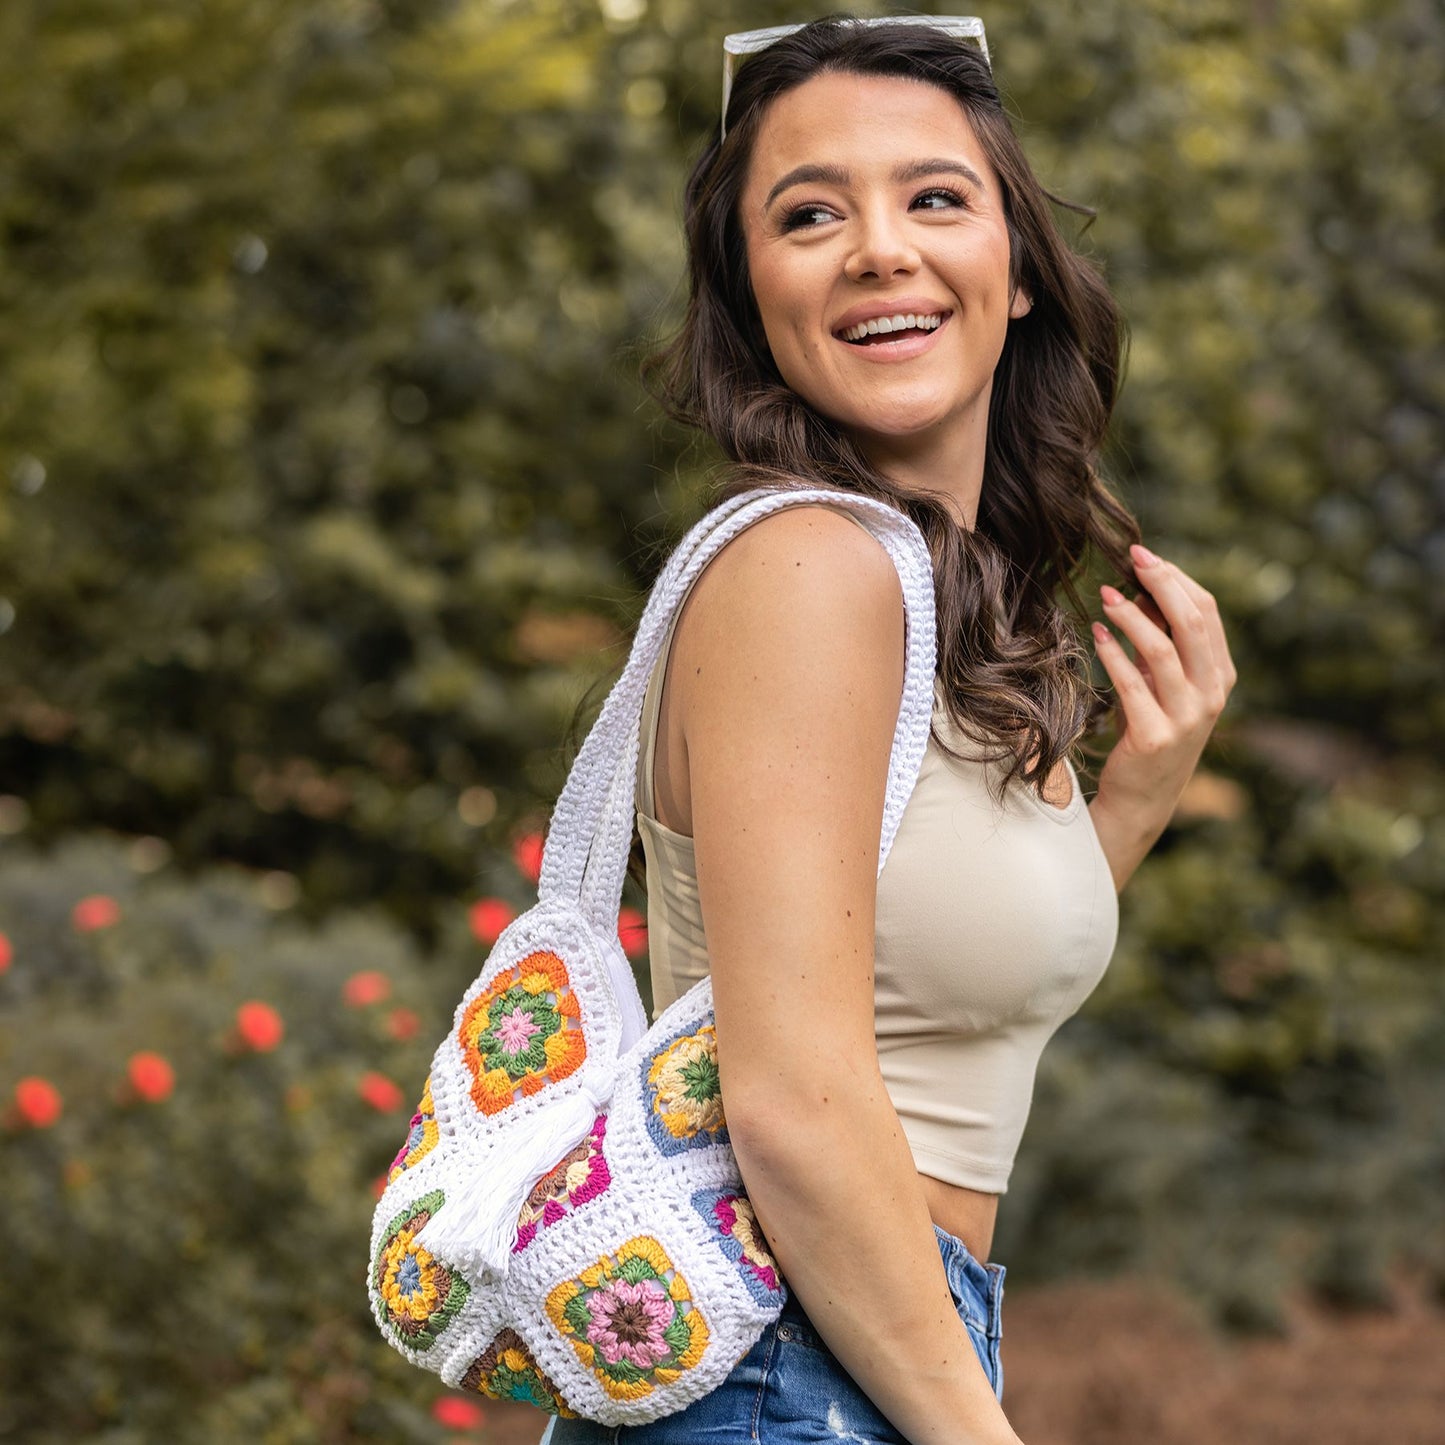 person walking in park with a white purse made of colorful crochet granny squares on their shoulder.